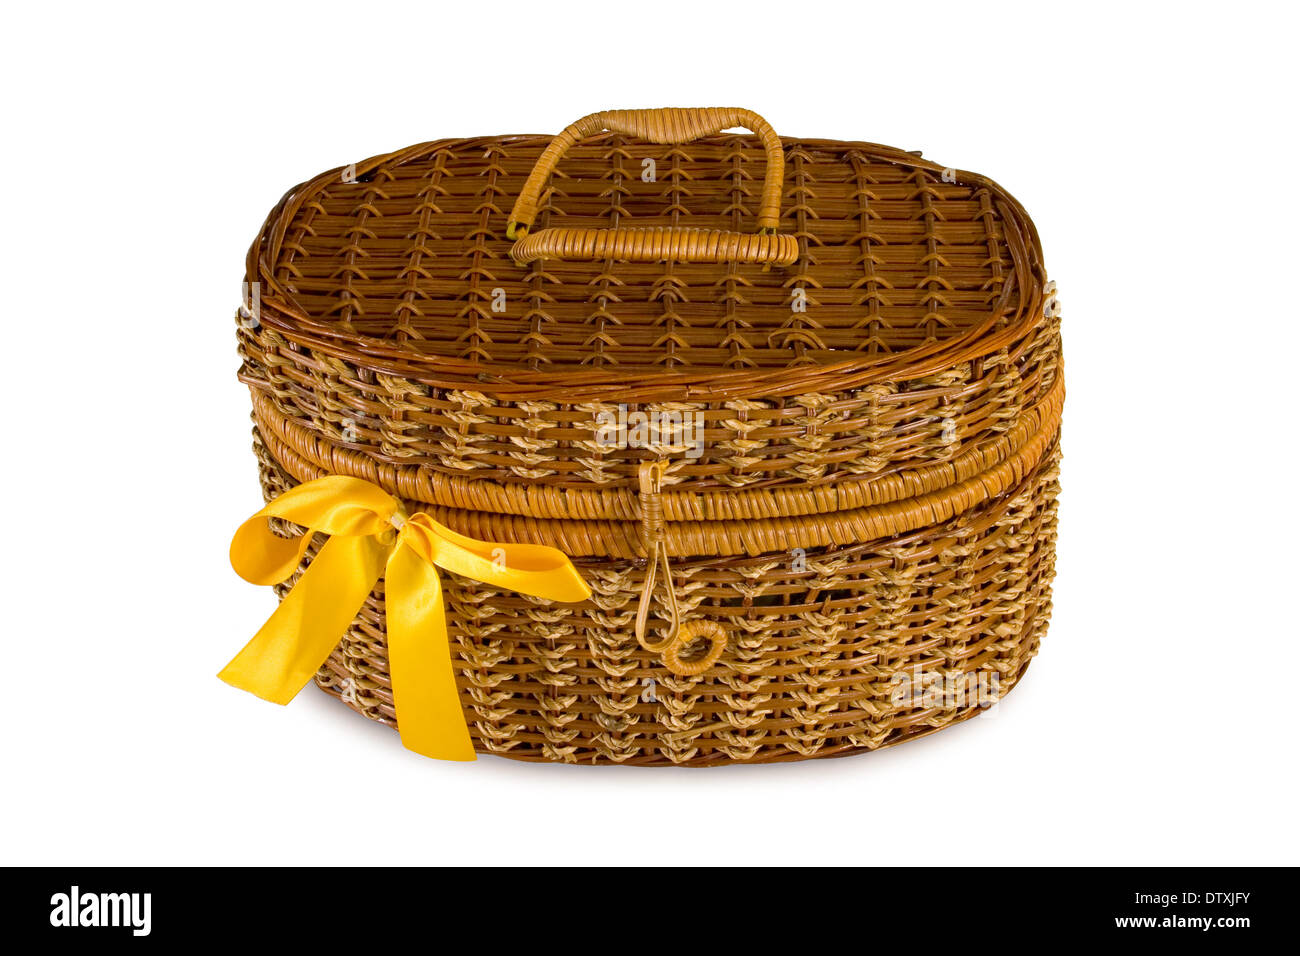 Basket with yellow bow Stock Photo